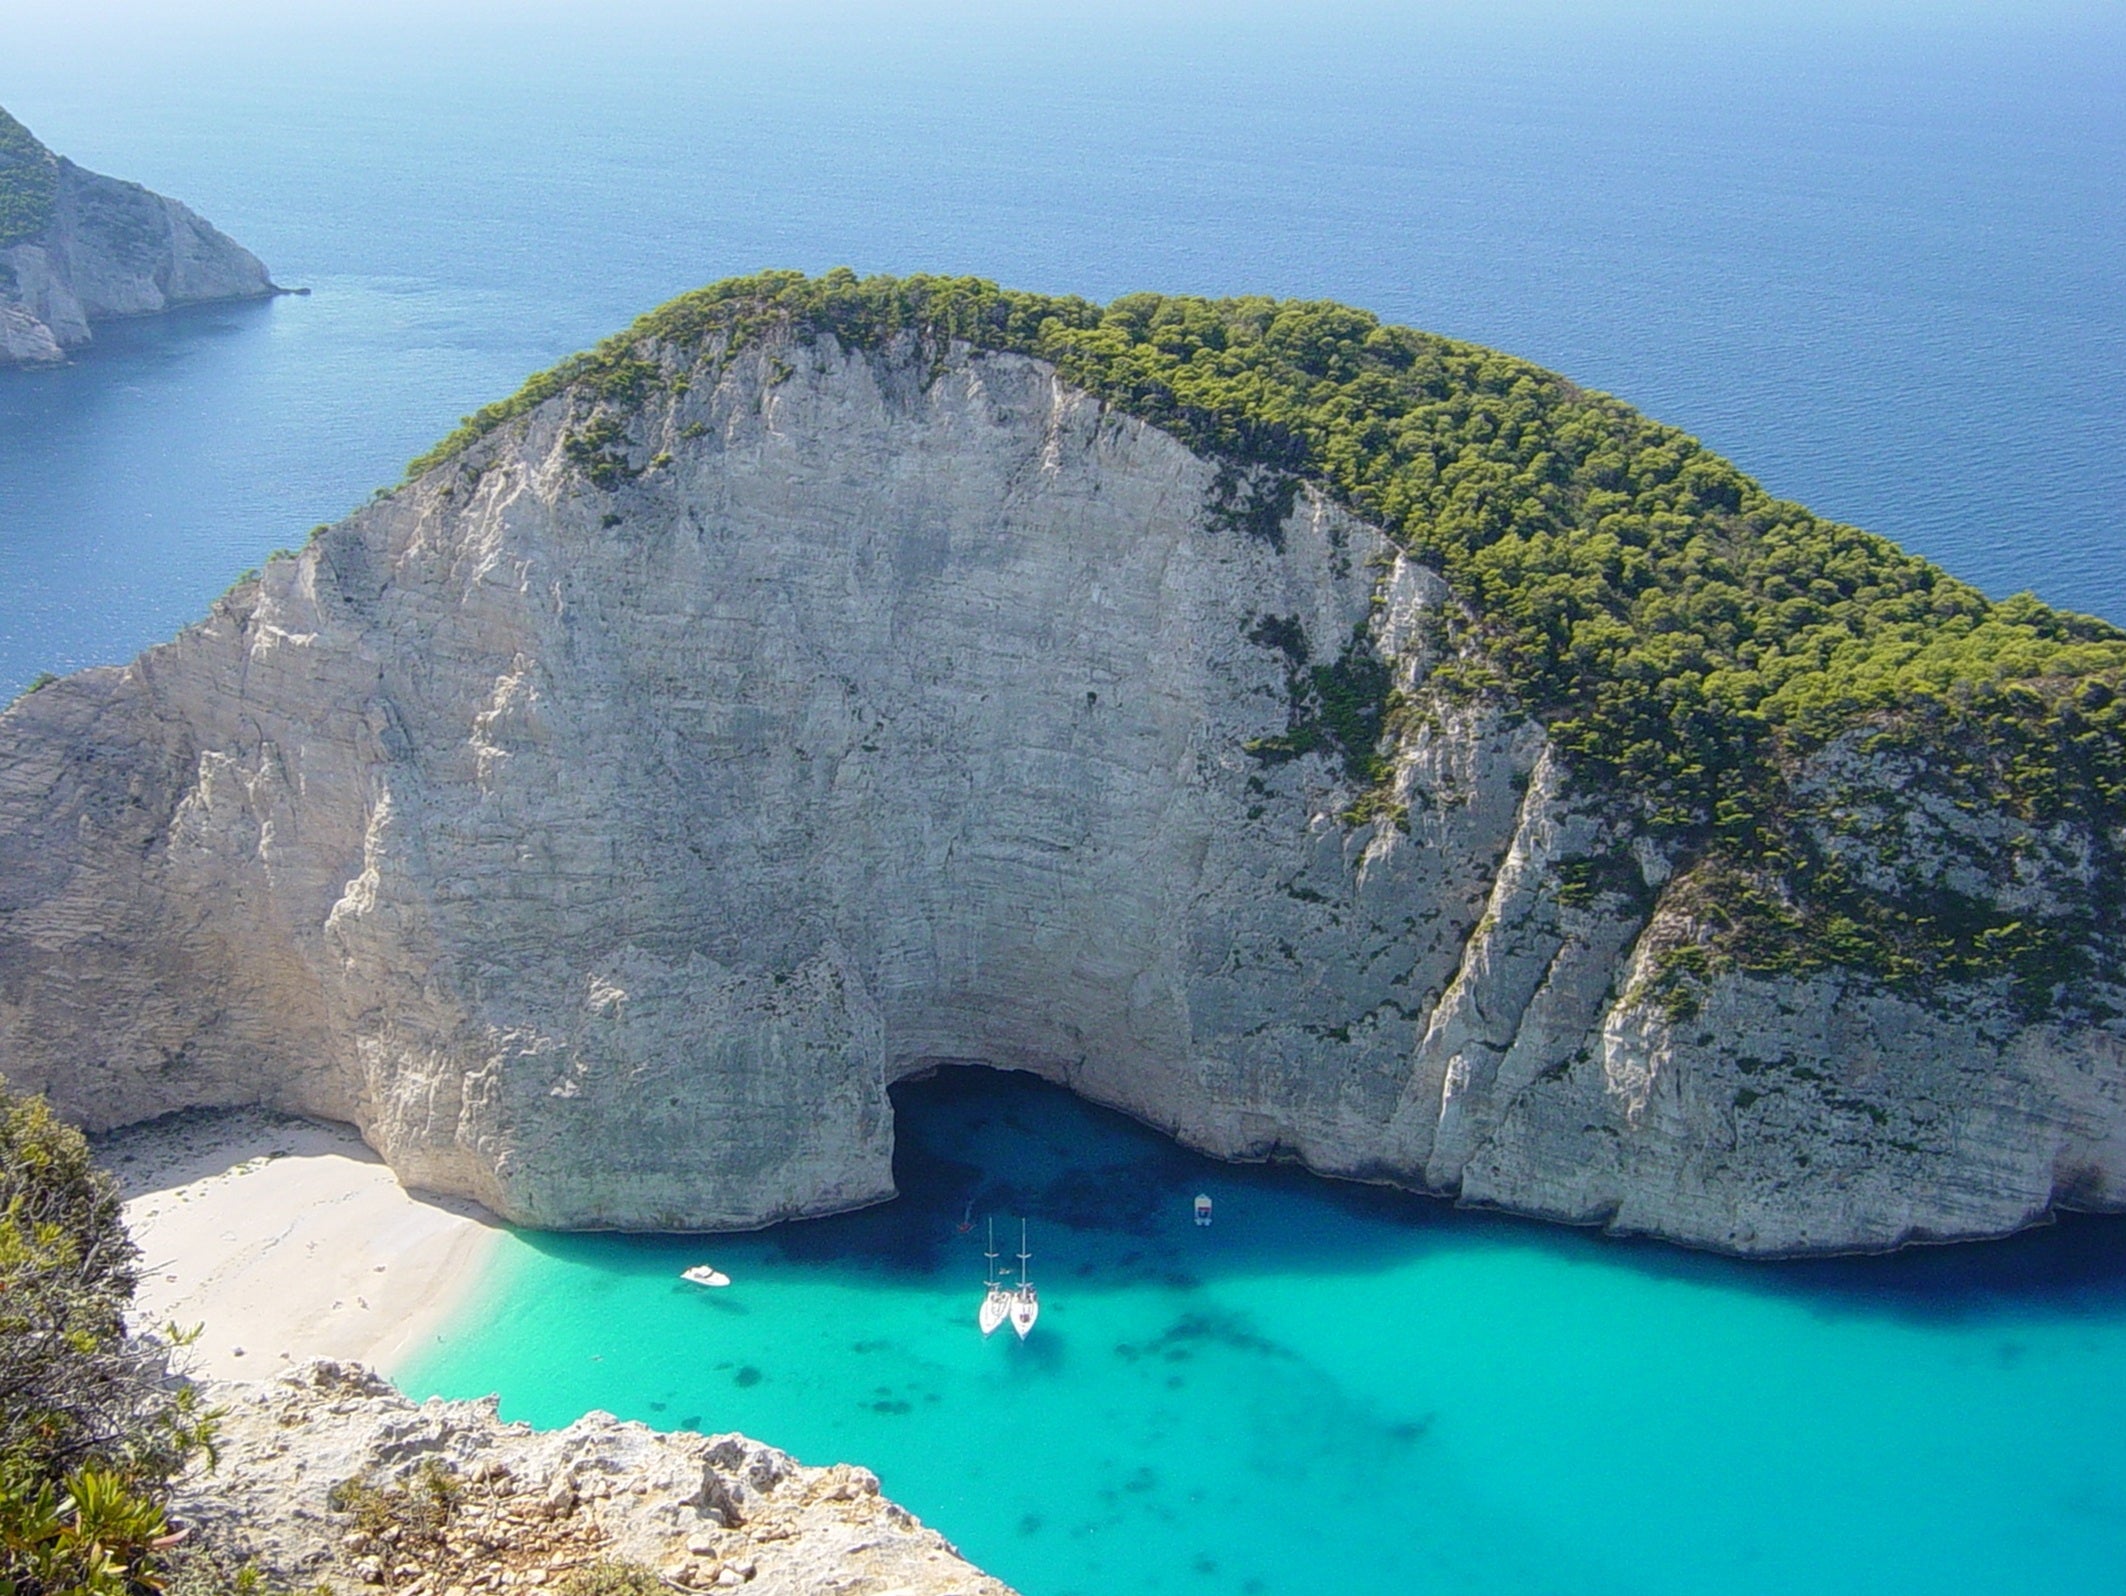 Room with a view: celebrating Zante’s more natural side